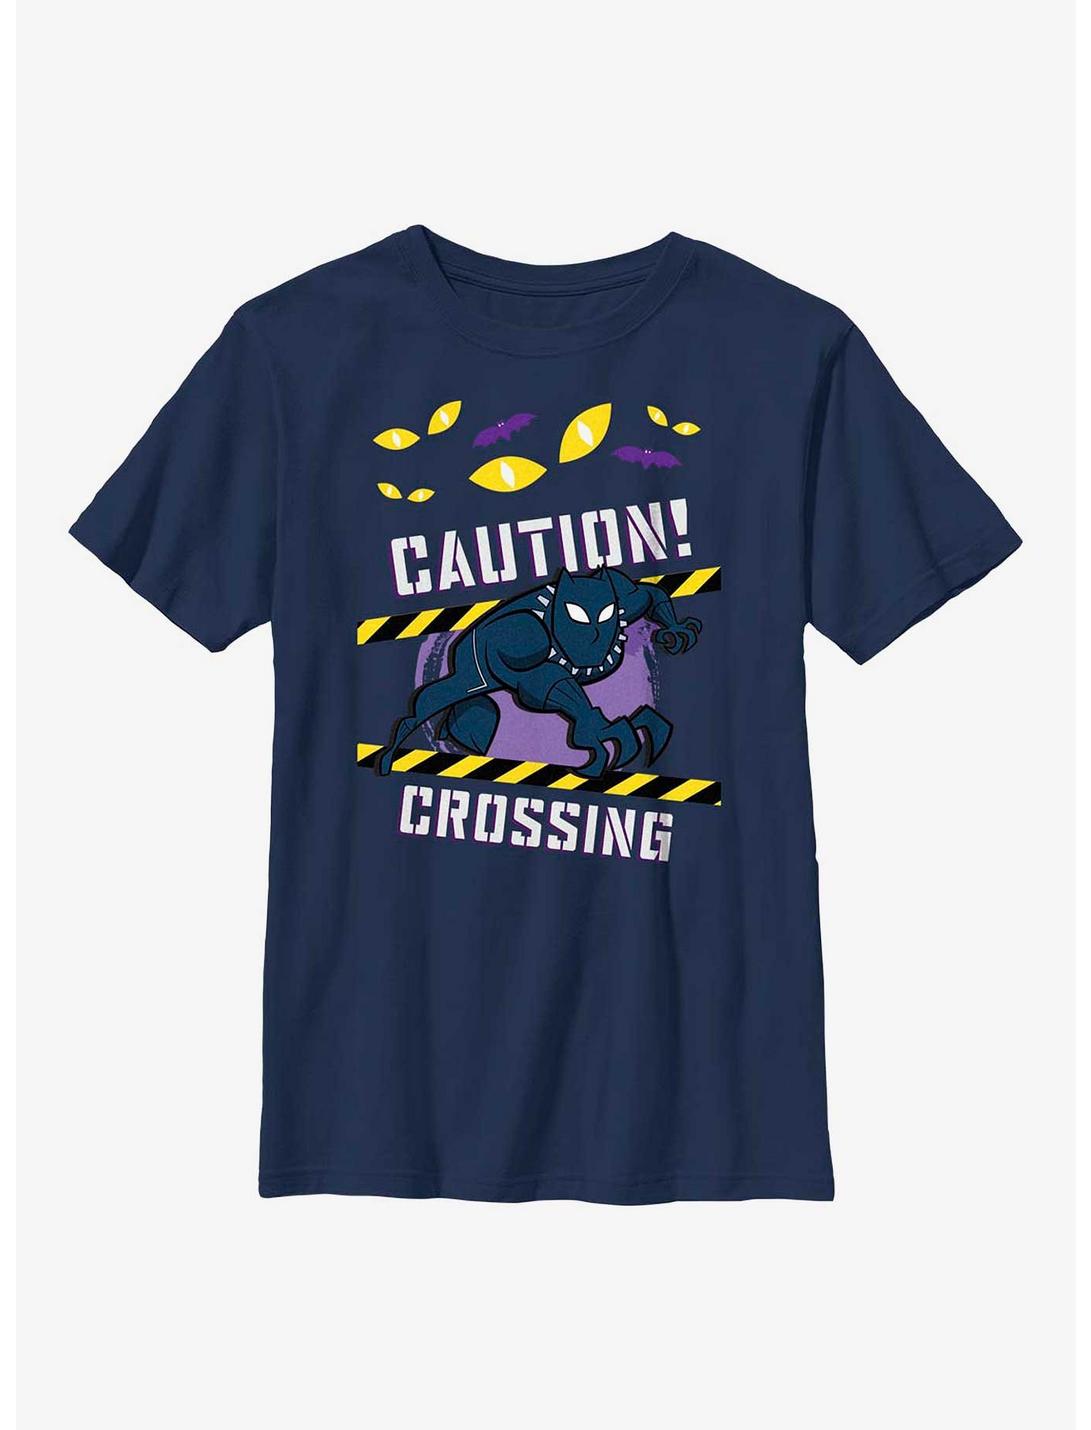 Marvel Black Panther Caution Crossing Youth T-Shirt, NAVY, hi-res